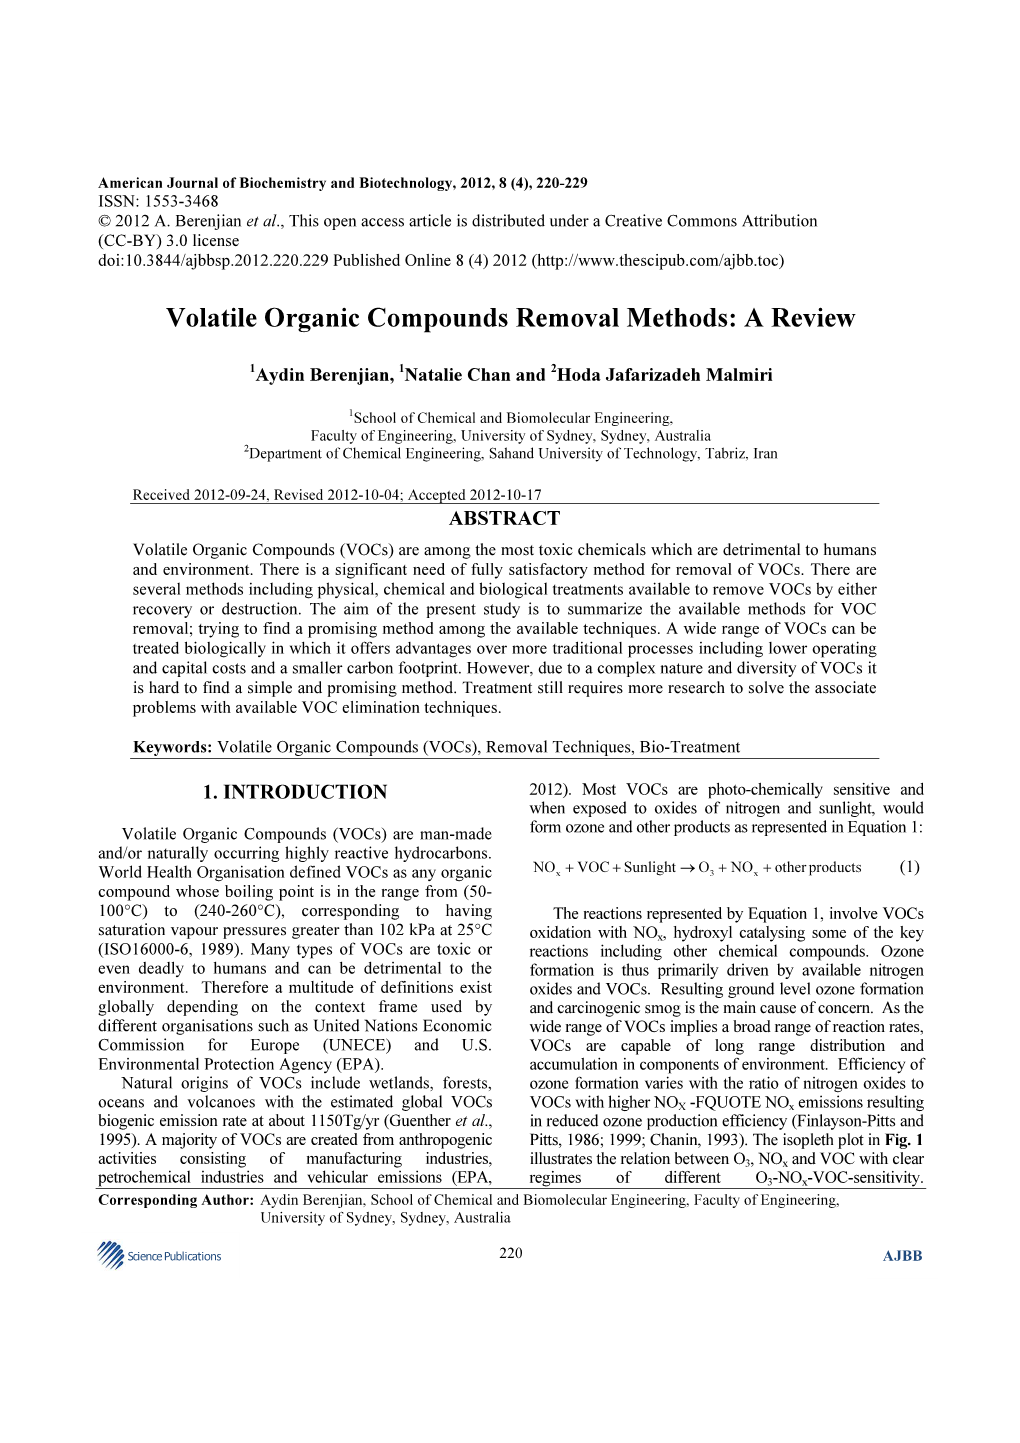 Volatile Organic Compounds Removal Methods: a Review